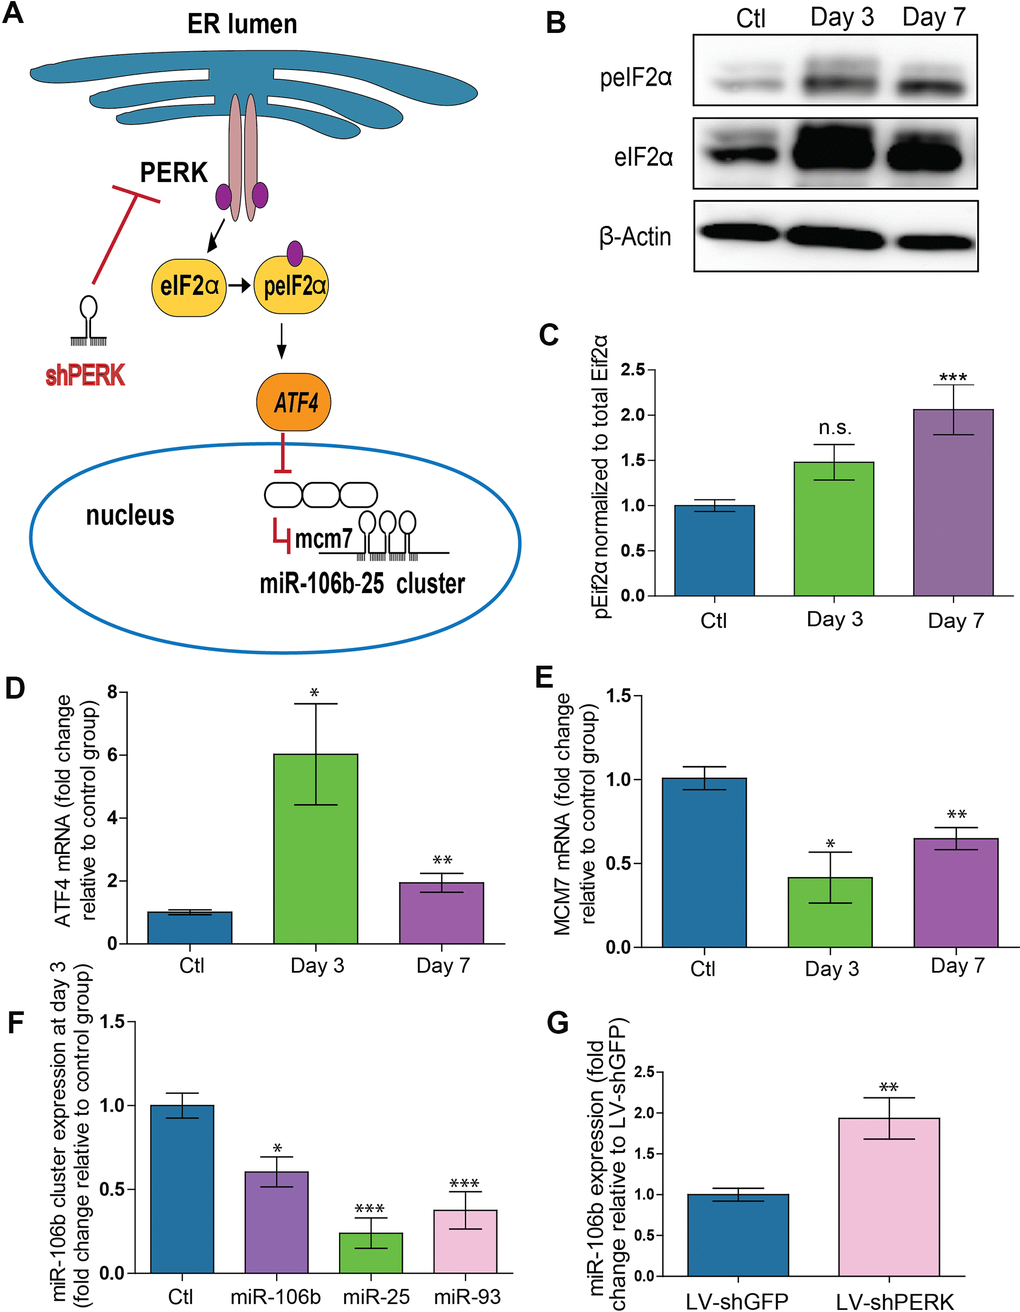 PERK activation provokes downregulation of miR-106b-25 cluster and MCM7 host gene in a mouse model of CNV. (A) Schematic of ER stress activation of PERK pathway. (B) Western blot of Phospho-EIF2α, total-EIF2α and β-actin in control choroids, and 3 and 7 days after burns. (C) Western blot quantification in control choroids, 3 days (n=7) and 7 days after burns (n=6). (D) Aft4 mRNA expression in control choroids, 3 days (n=6) and 7 days after burns (n=10). (E) Mcm7 mRNA expression in control choroids, 3 days (n=6) and 7 days after laser burn (n=14). (F) miR106~25 cluster member expression in choroids 3 days after laser burn (miR-106b (n=7), miR-25 (n=6) and miR-93 (n=5). (G) miR-106b expression after infection of HRMECs with LV.shGFP (negative control), and LV.shPERK (n=5). Data are expressed as mean ± S.E.M. One-way ANOVA with Bonferroni post-hoc test was performed on groups of 3 or more, and unpaired Two-tailed Student’s t-test was used for the analysis of groups of 2, *P 